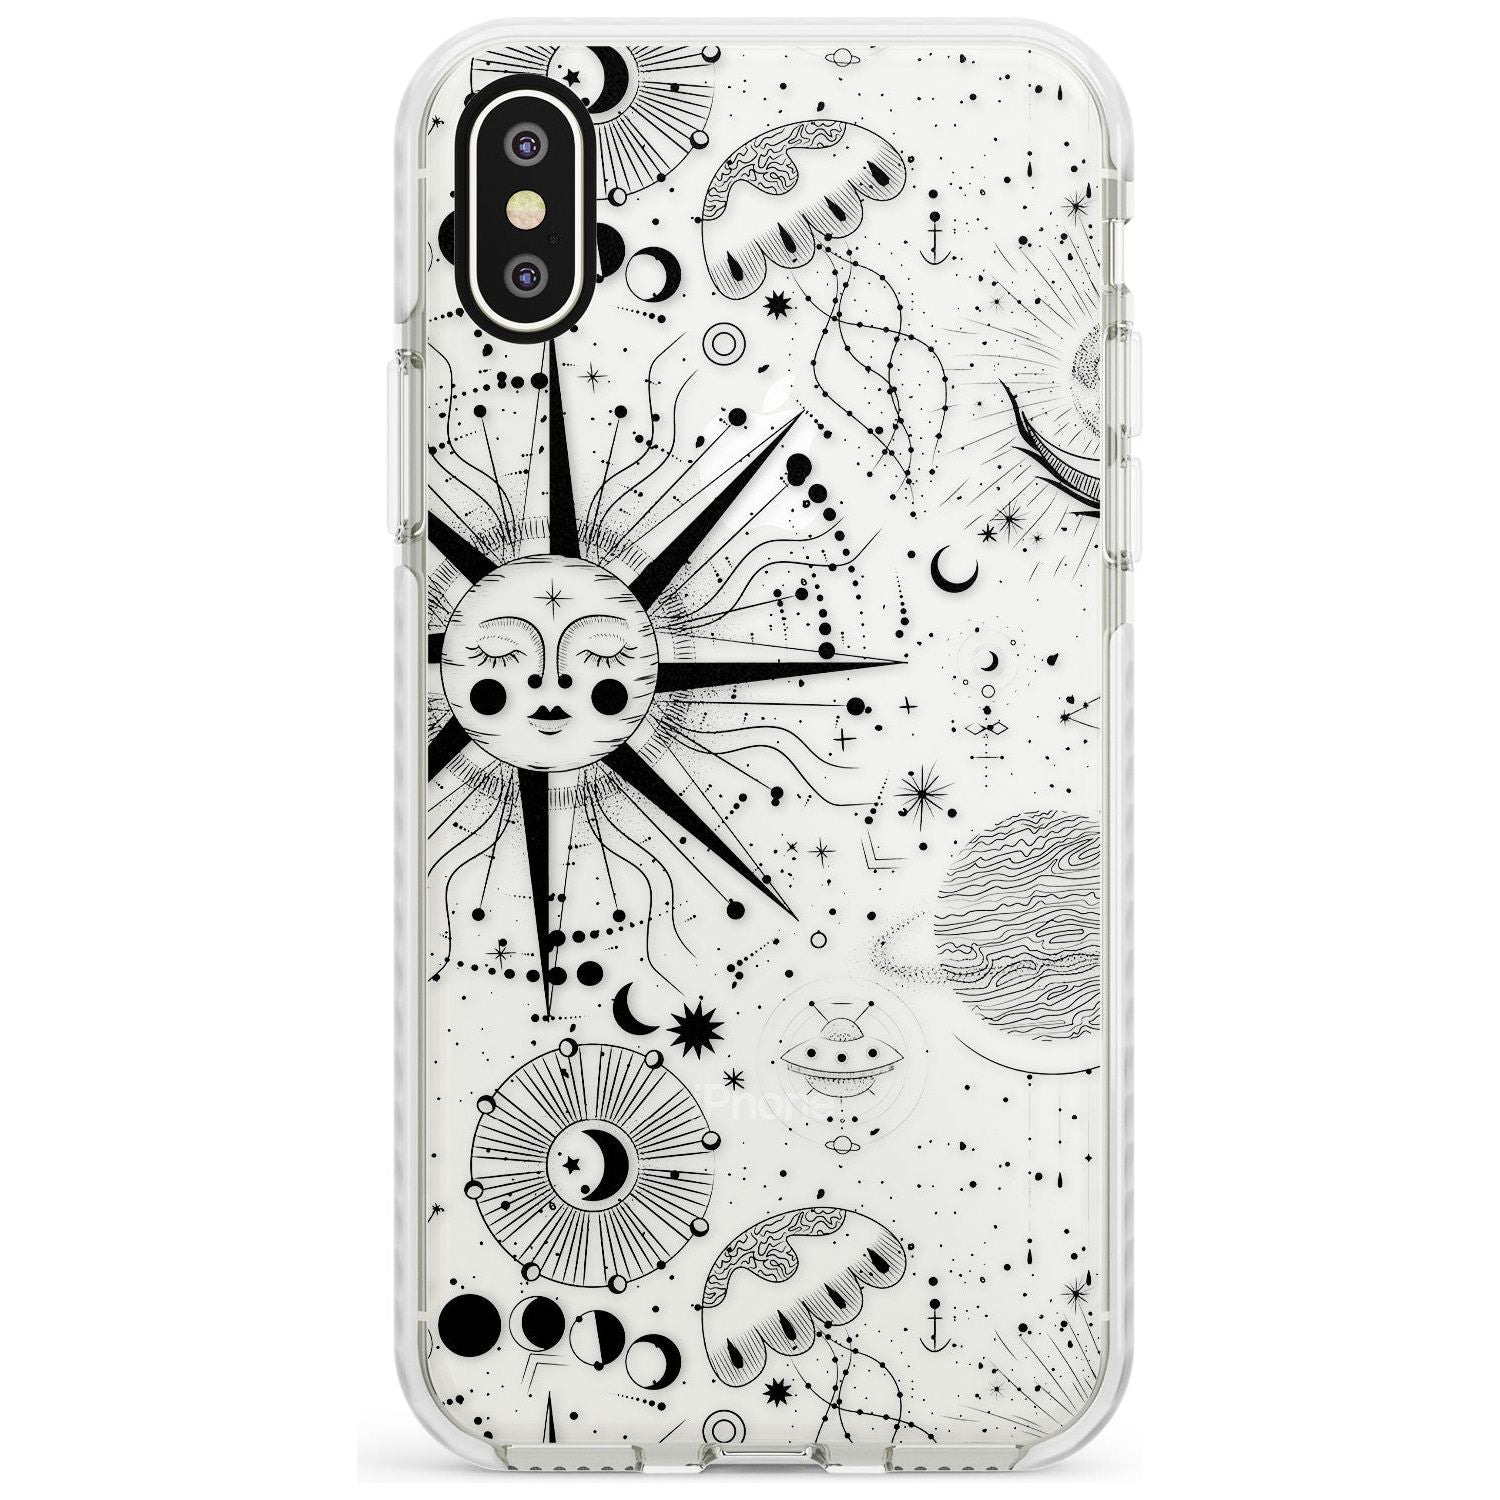 Large Sun Vintage Astrological Impact Phone Case for iPhone X XS Max XR